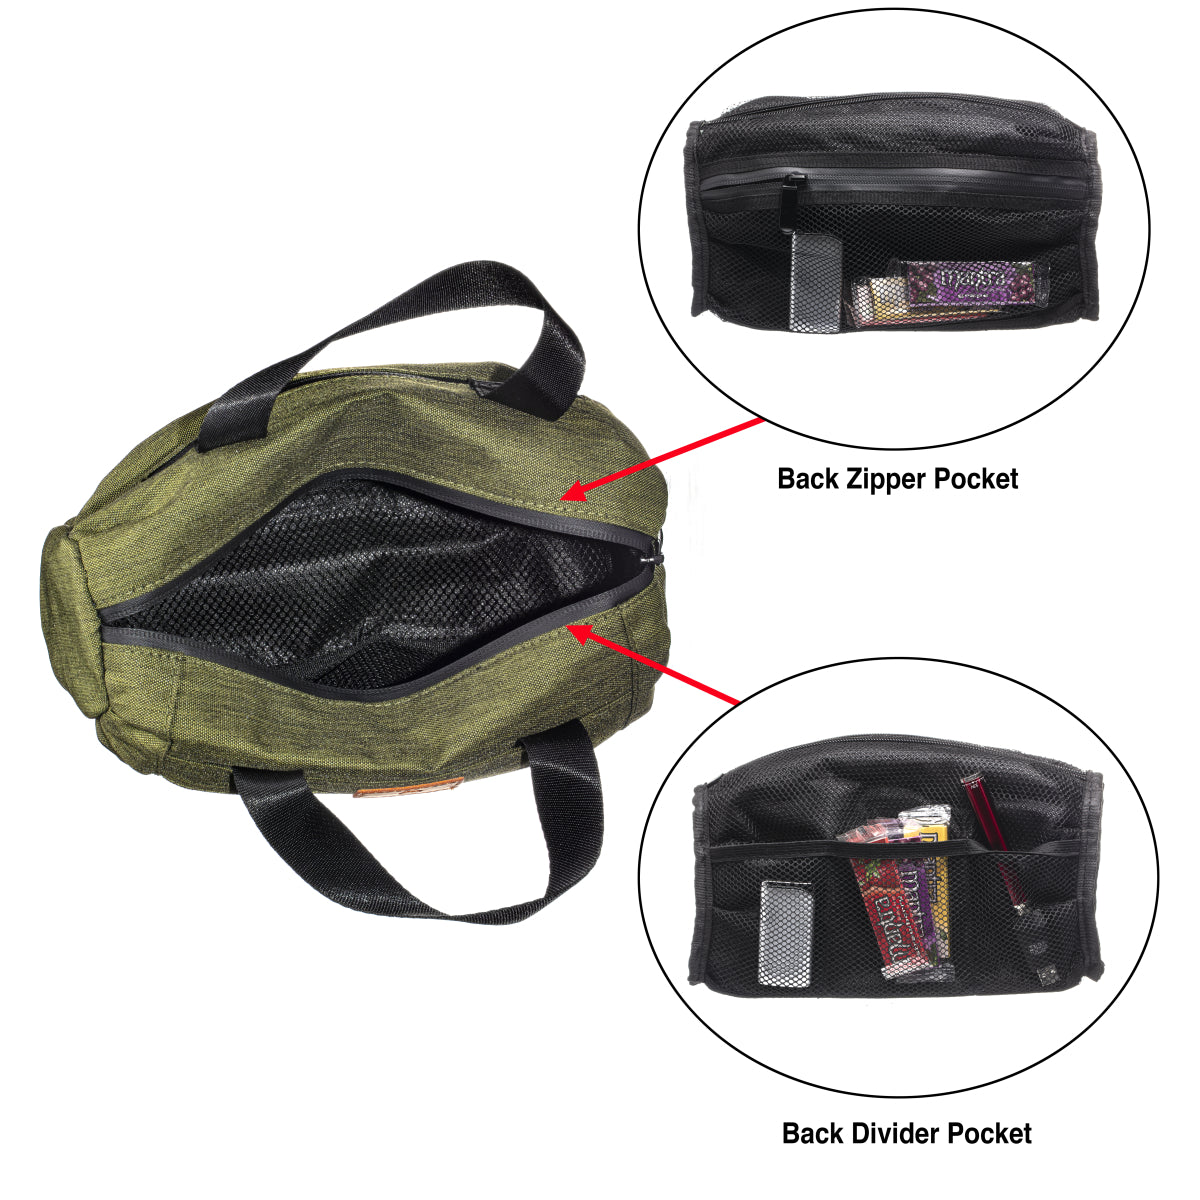 Rollin Budz Marley Scent Free Bag - (1 Count)-Lock Boxes, Storage Cases & Transport Bags